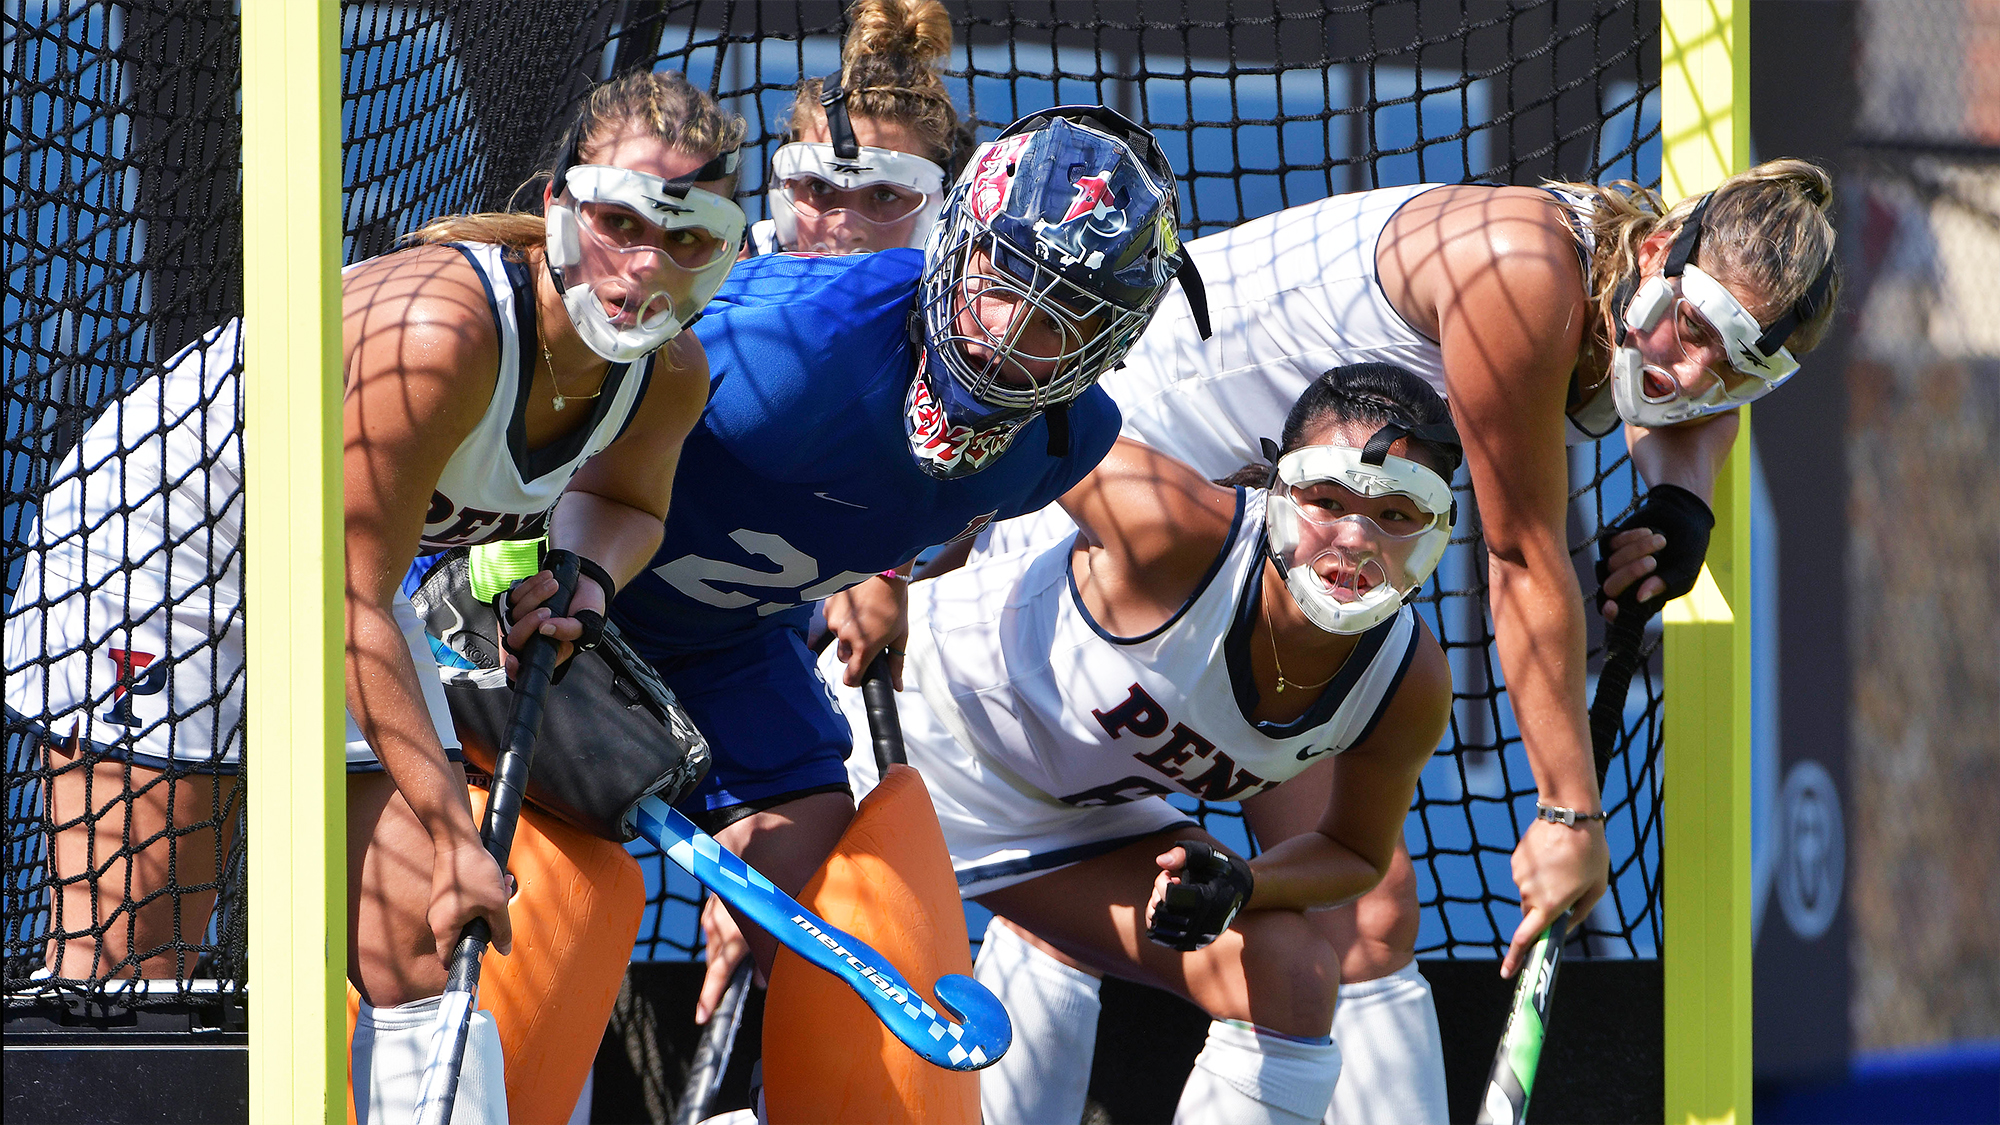 Ava Rosati stands inside the goal with her teammates during a corner during a field hockey game.